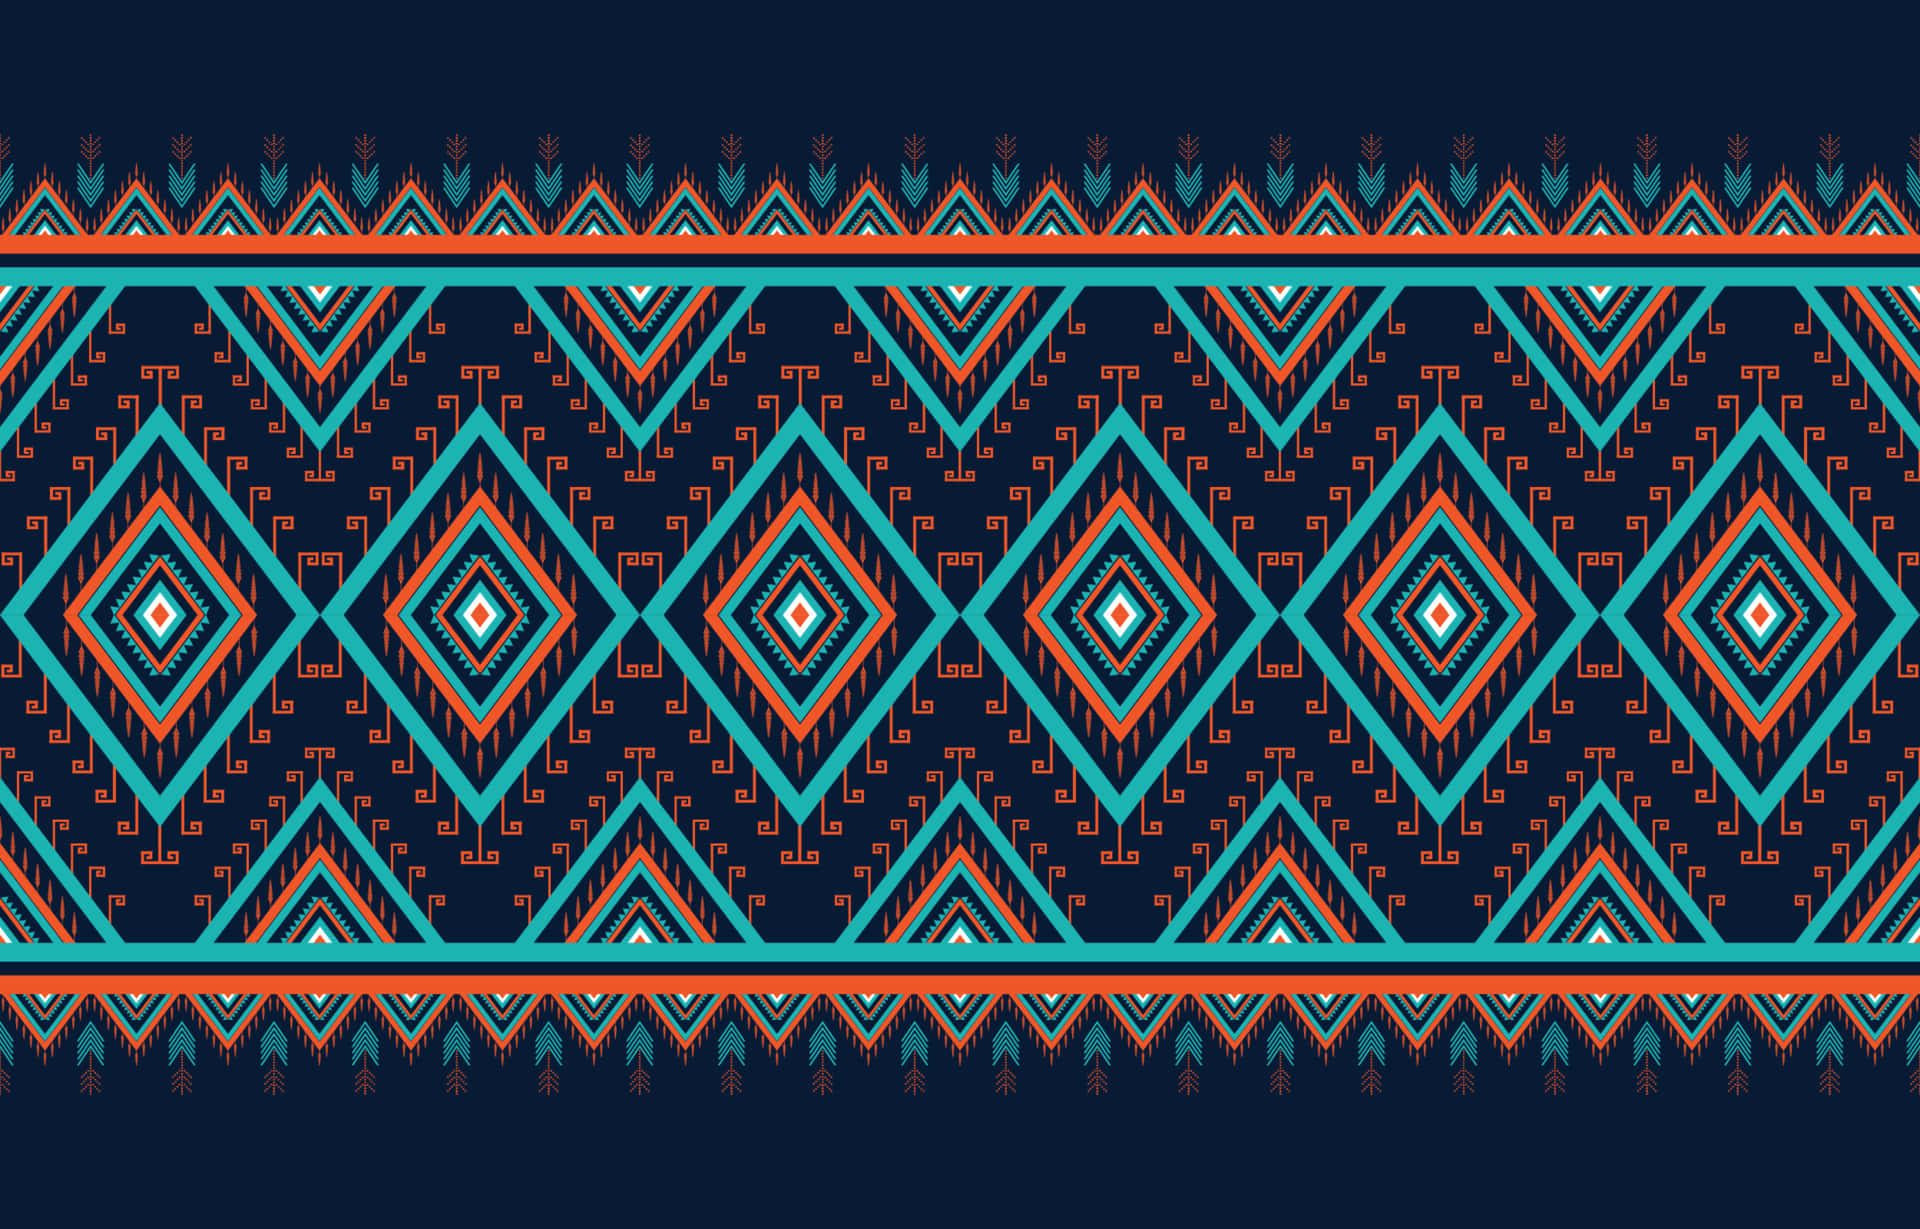 A Tribal Pattern With Blue, Orange And Green Colors